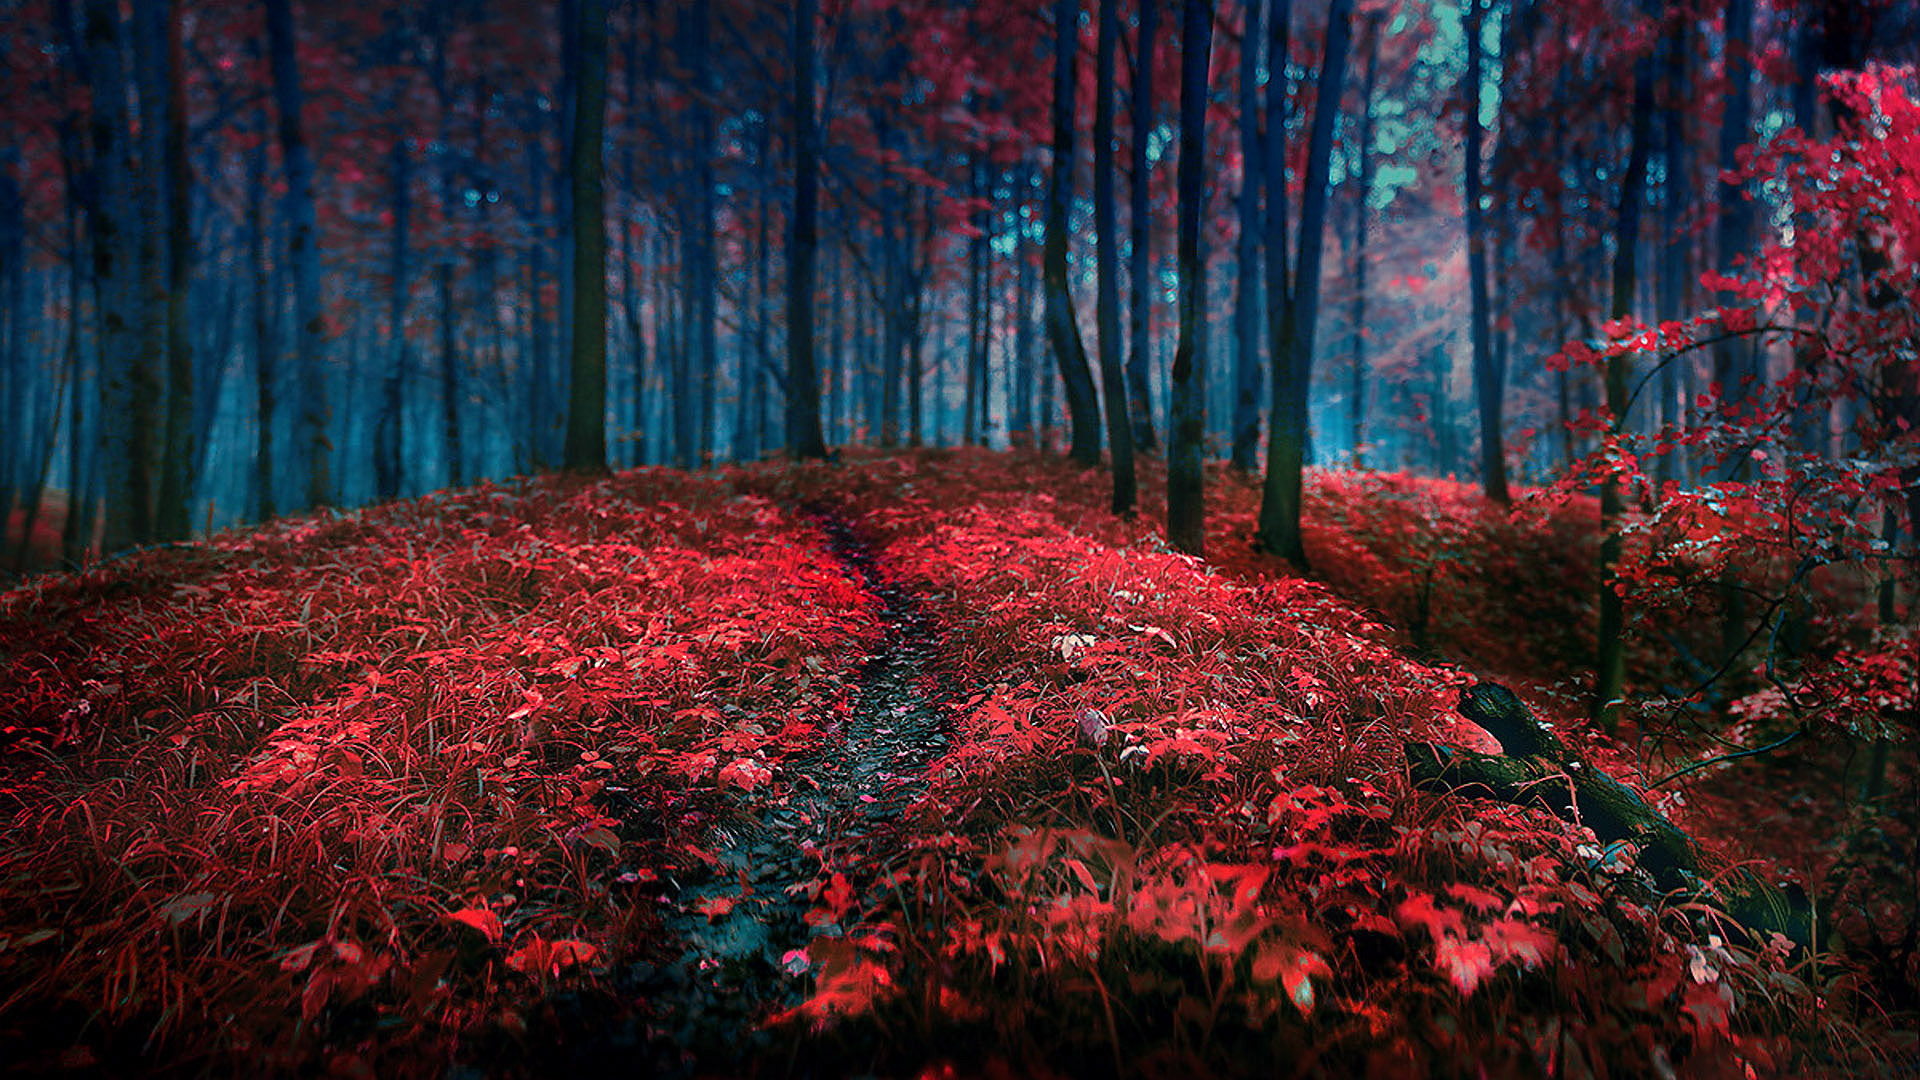 landscapes, Nature, Trees, Forest, Autumn, Fall, Seasons, Red, Contrast, Leaves Wallpaper